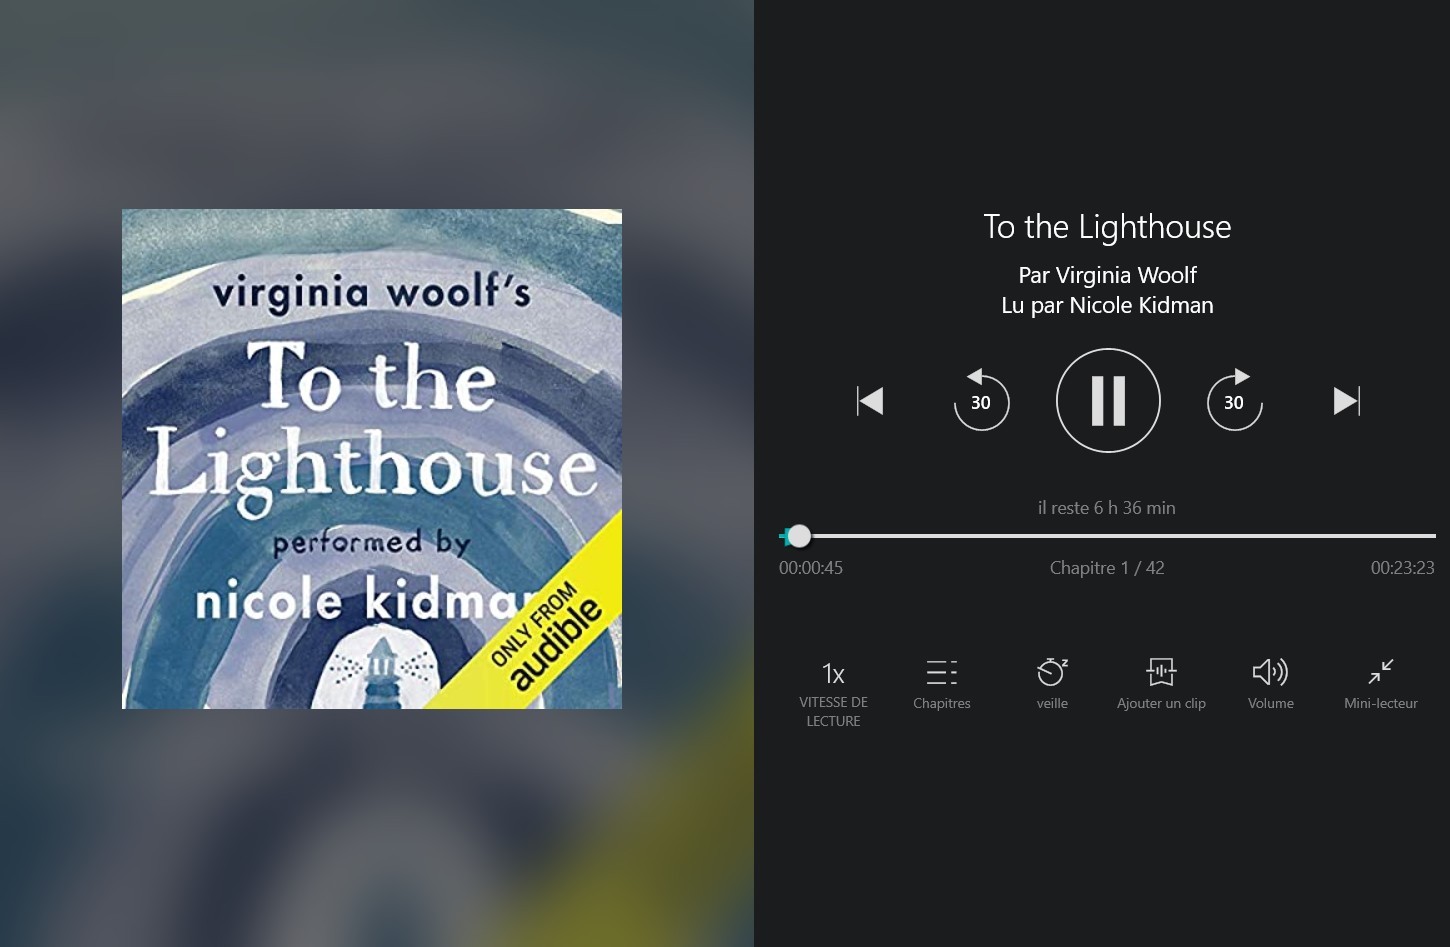 Nicole Kidman reads To the Lighthouse by Virginia Woolf. 6 hrs 37 mins